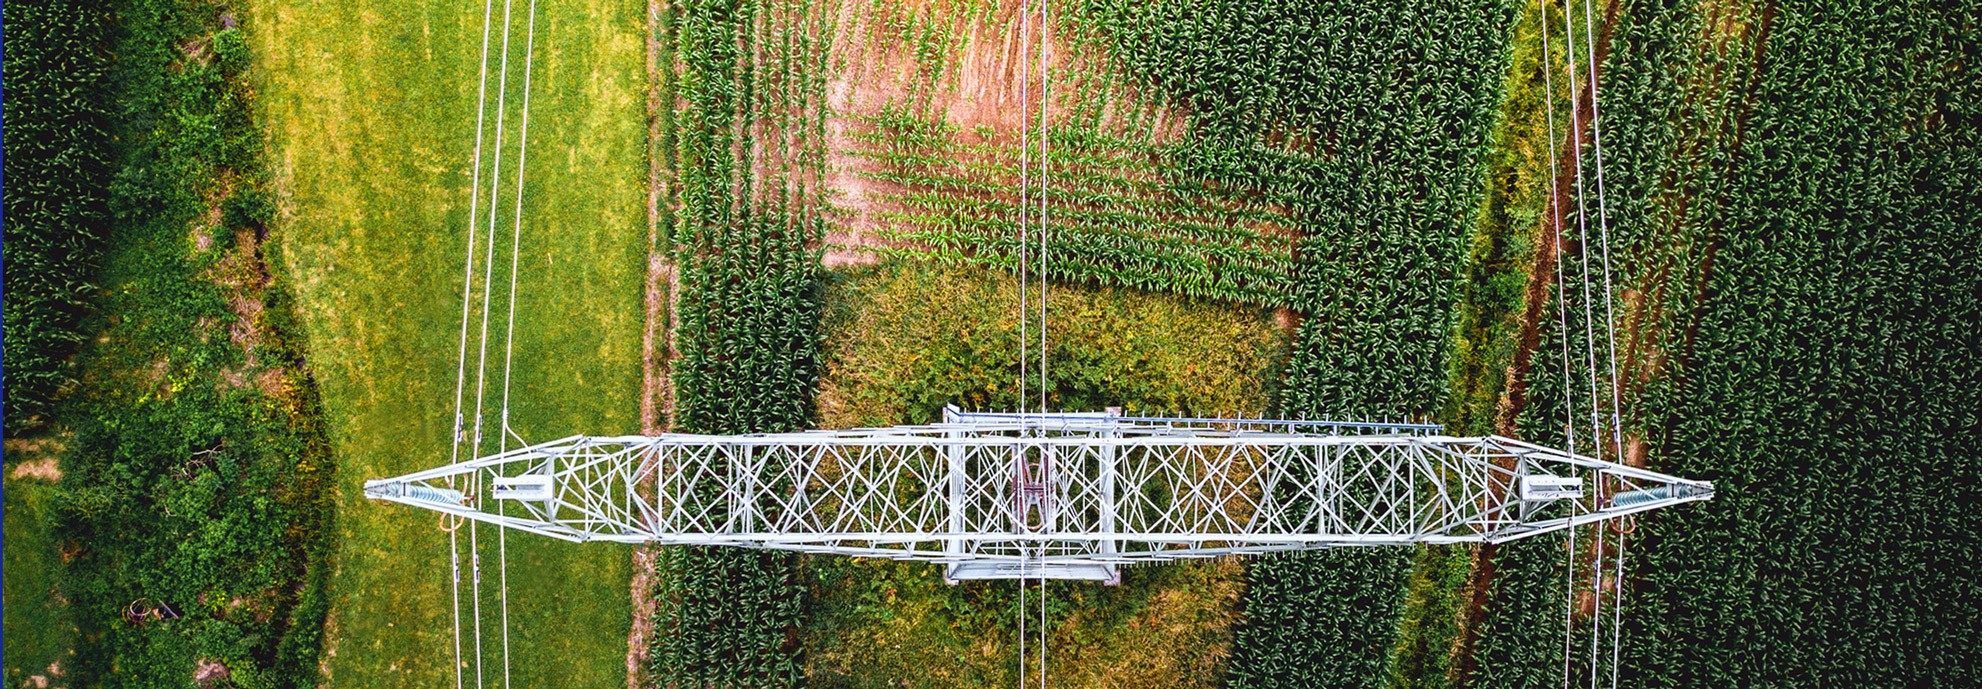 aerial view of electrical tower and wires in a green field